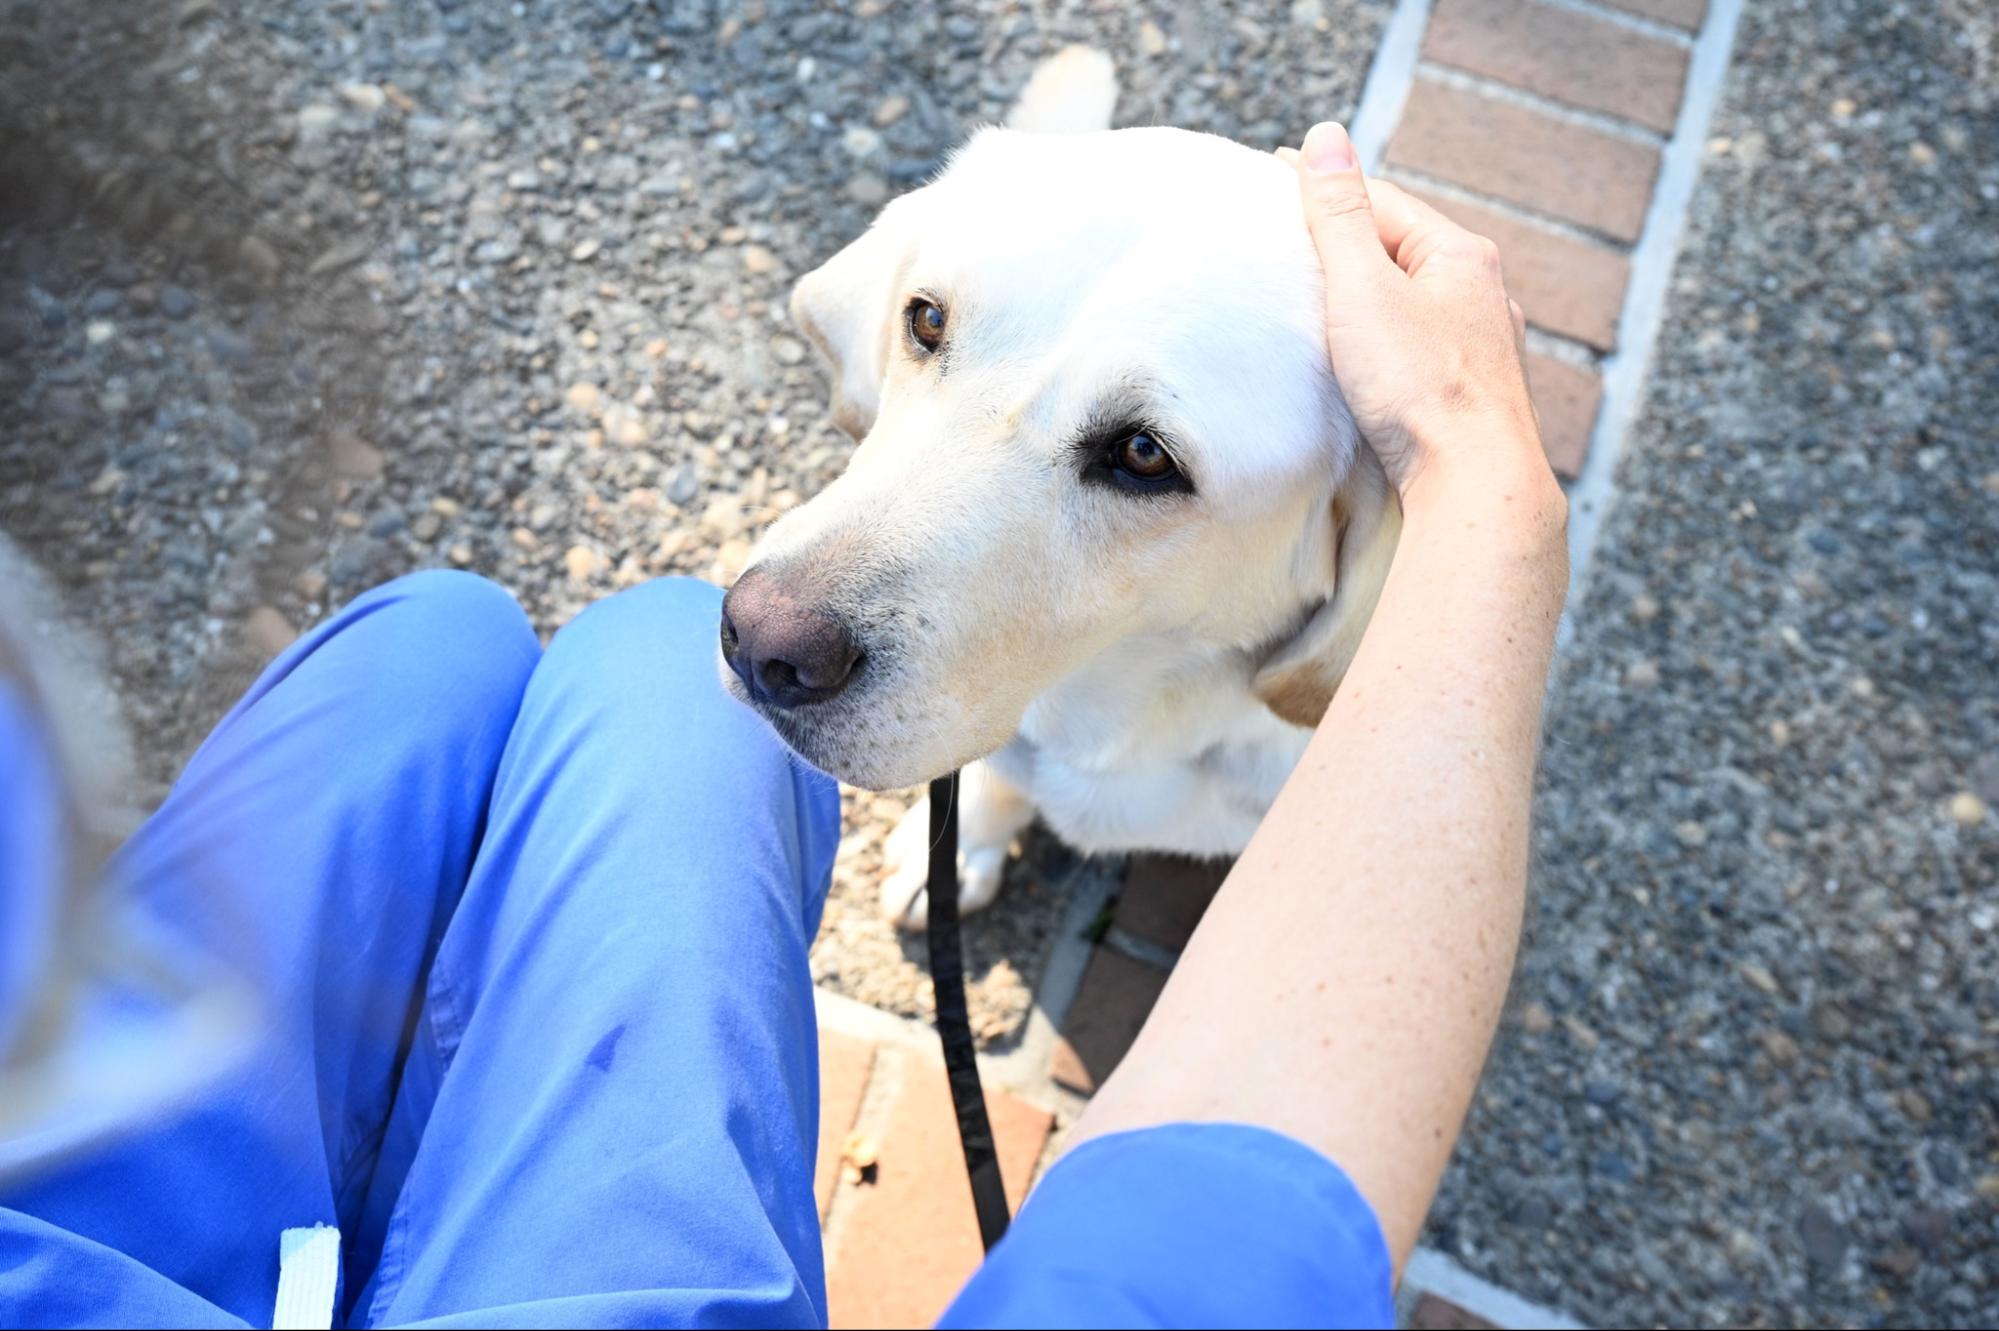 A therapy dog sits and receives pets from someone at the hospital. 